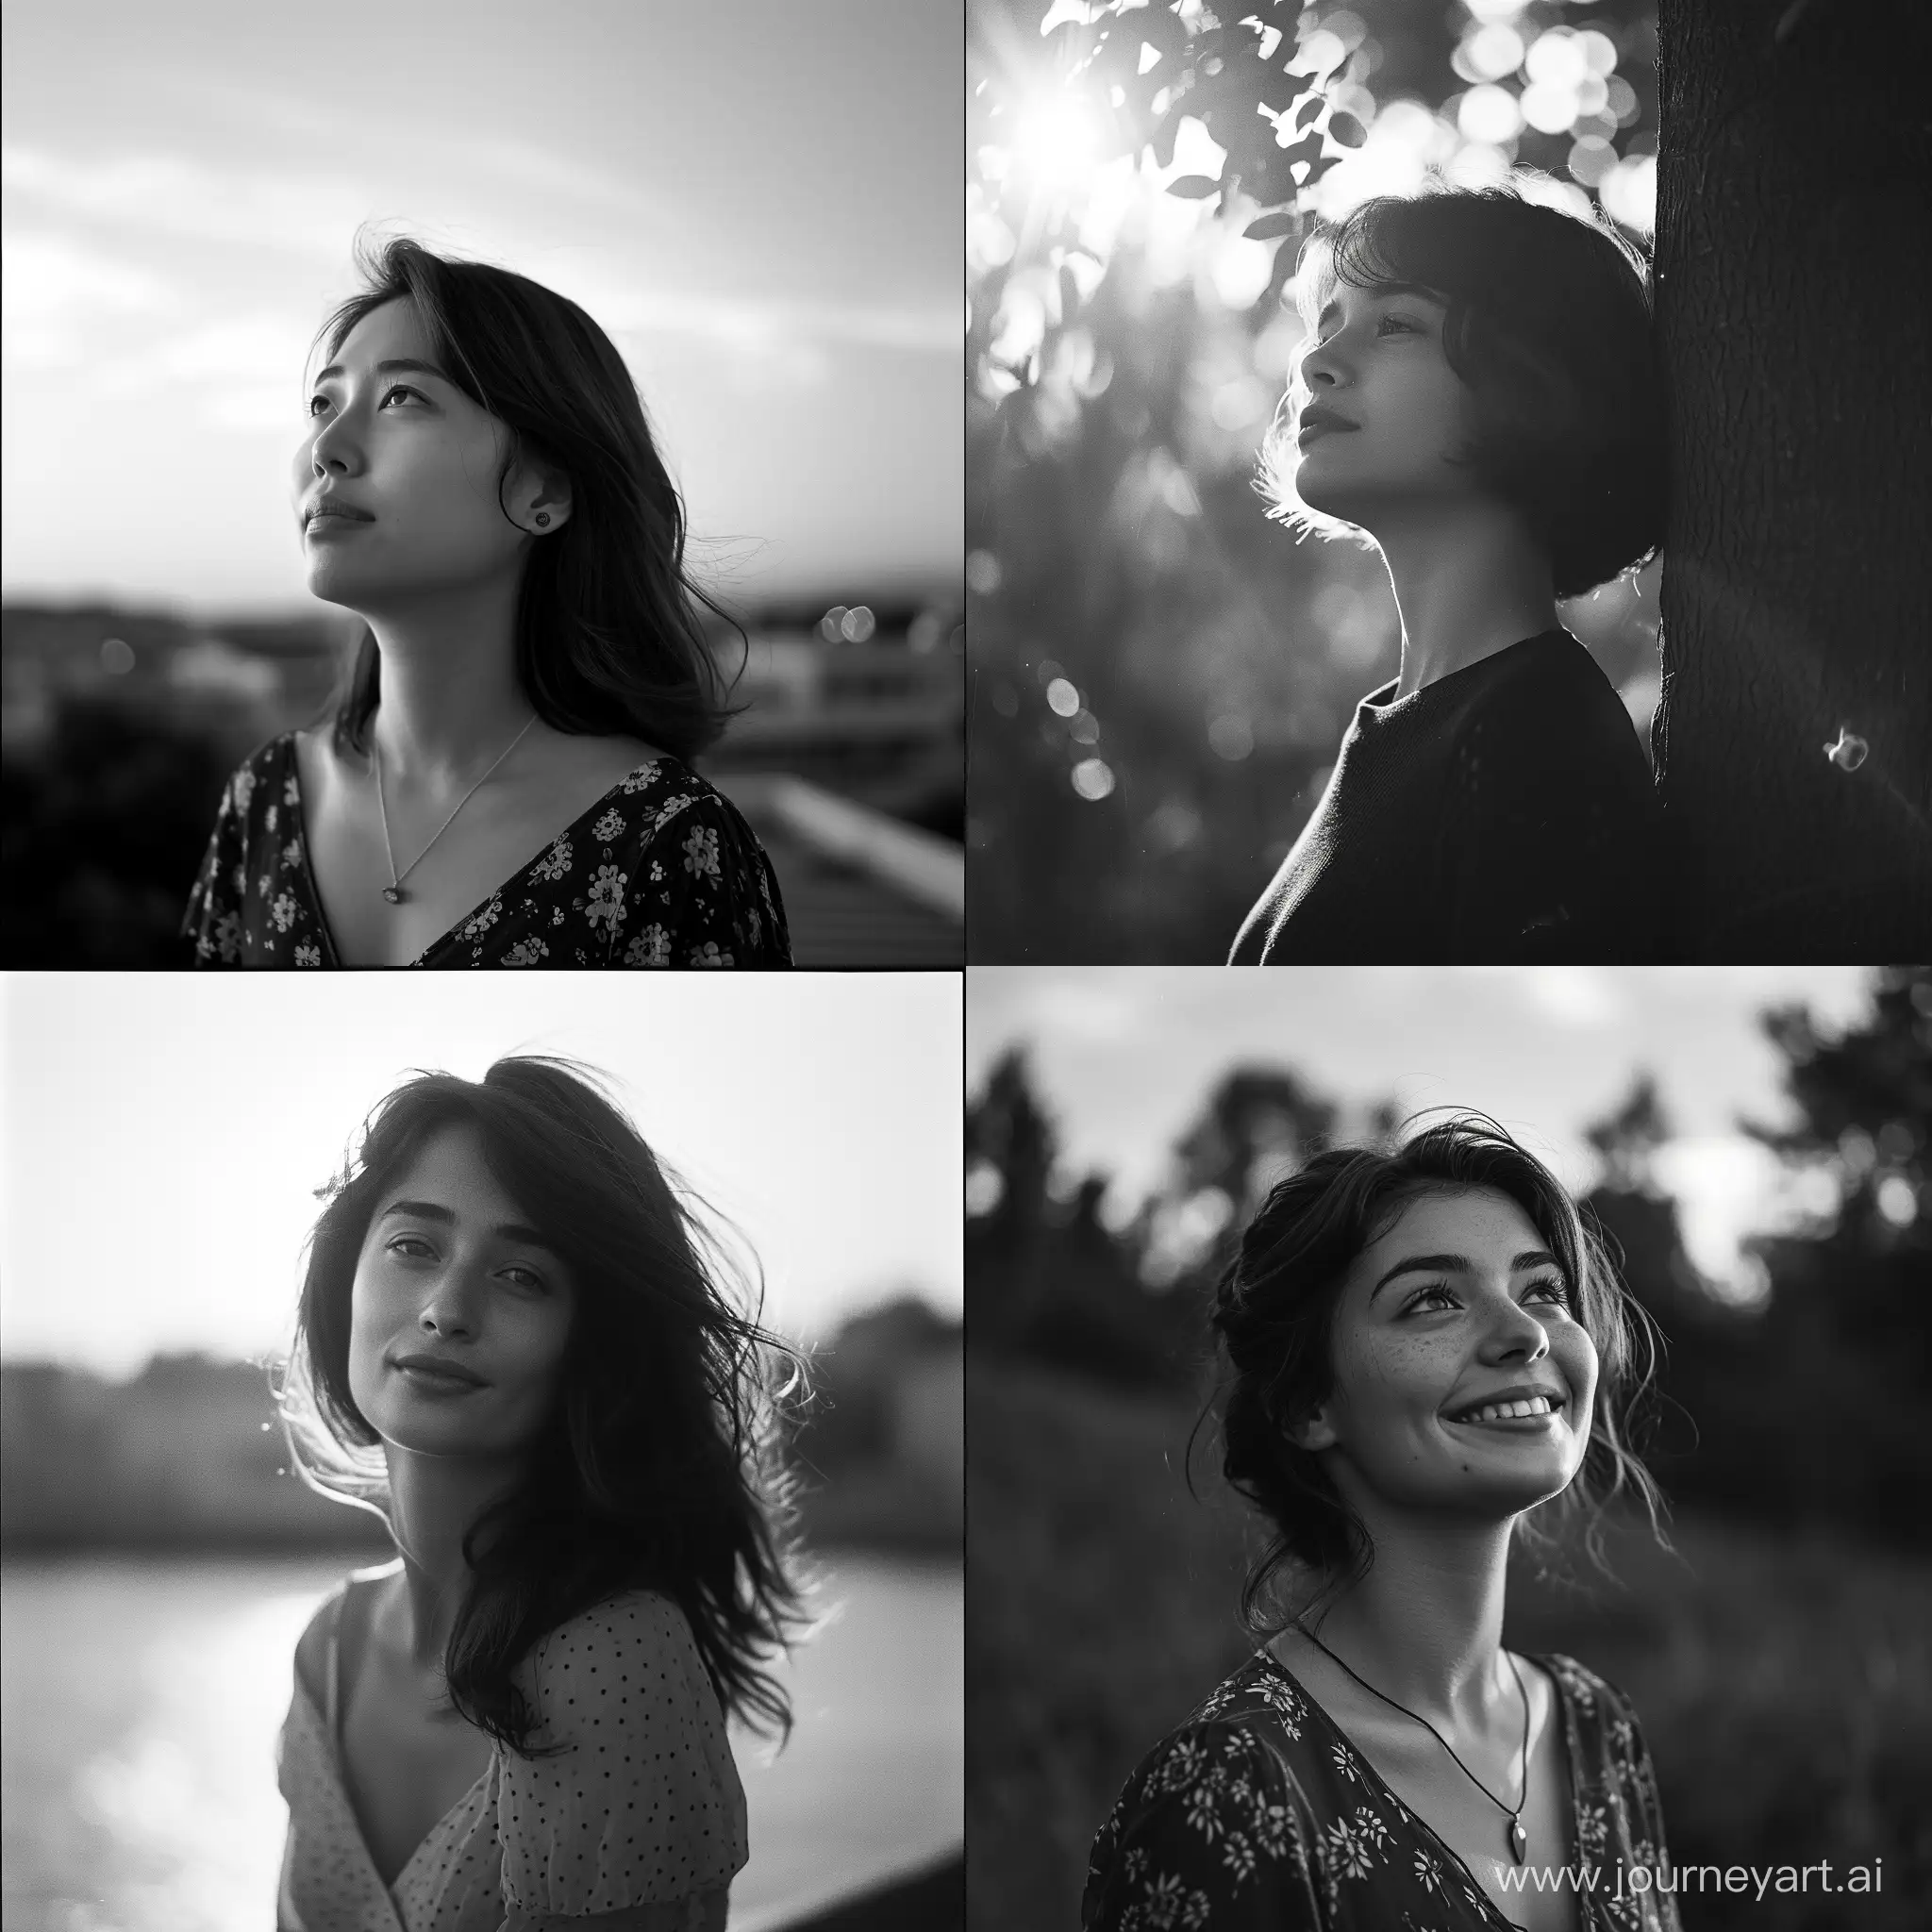 Mysterious. Adult. Persistent. Elegant. Authentic. Camera type: High definition DSLR camera. Lens Camera: Fixed lens at any angle. Time of day: Sunset to take in the warmth and create a play of light. Photography style: Cheerful portrait with elements of mijorni style. Film Type: Black and white film to enhance contrasts and details. Camera settings: High ISO for low-light shooting, wide lens aperture for dramatic bokeh, high tonality and high brightness to capture every detail.